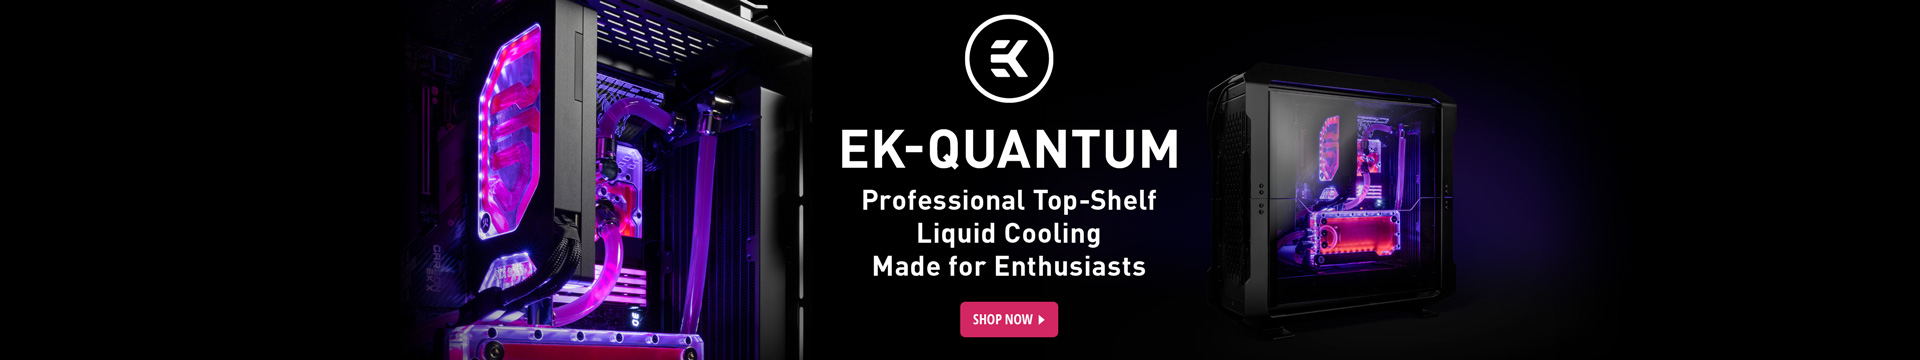 Professional Top-Shelf Liquid Cooling Made for Enthusiasts